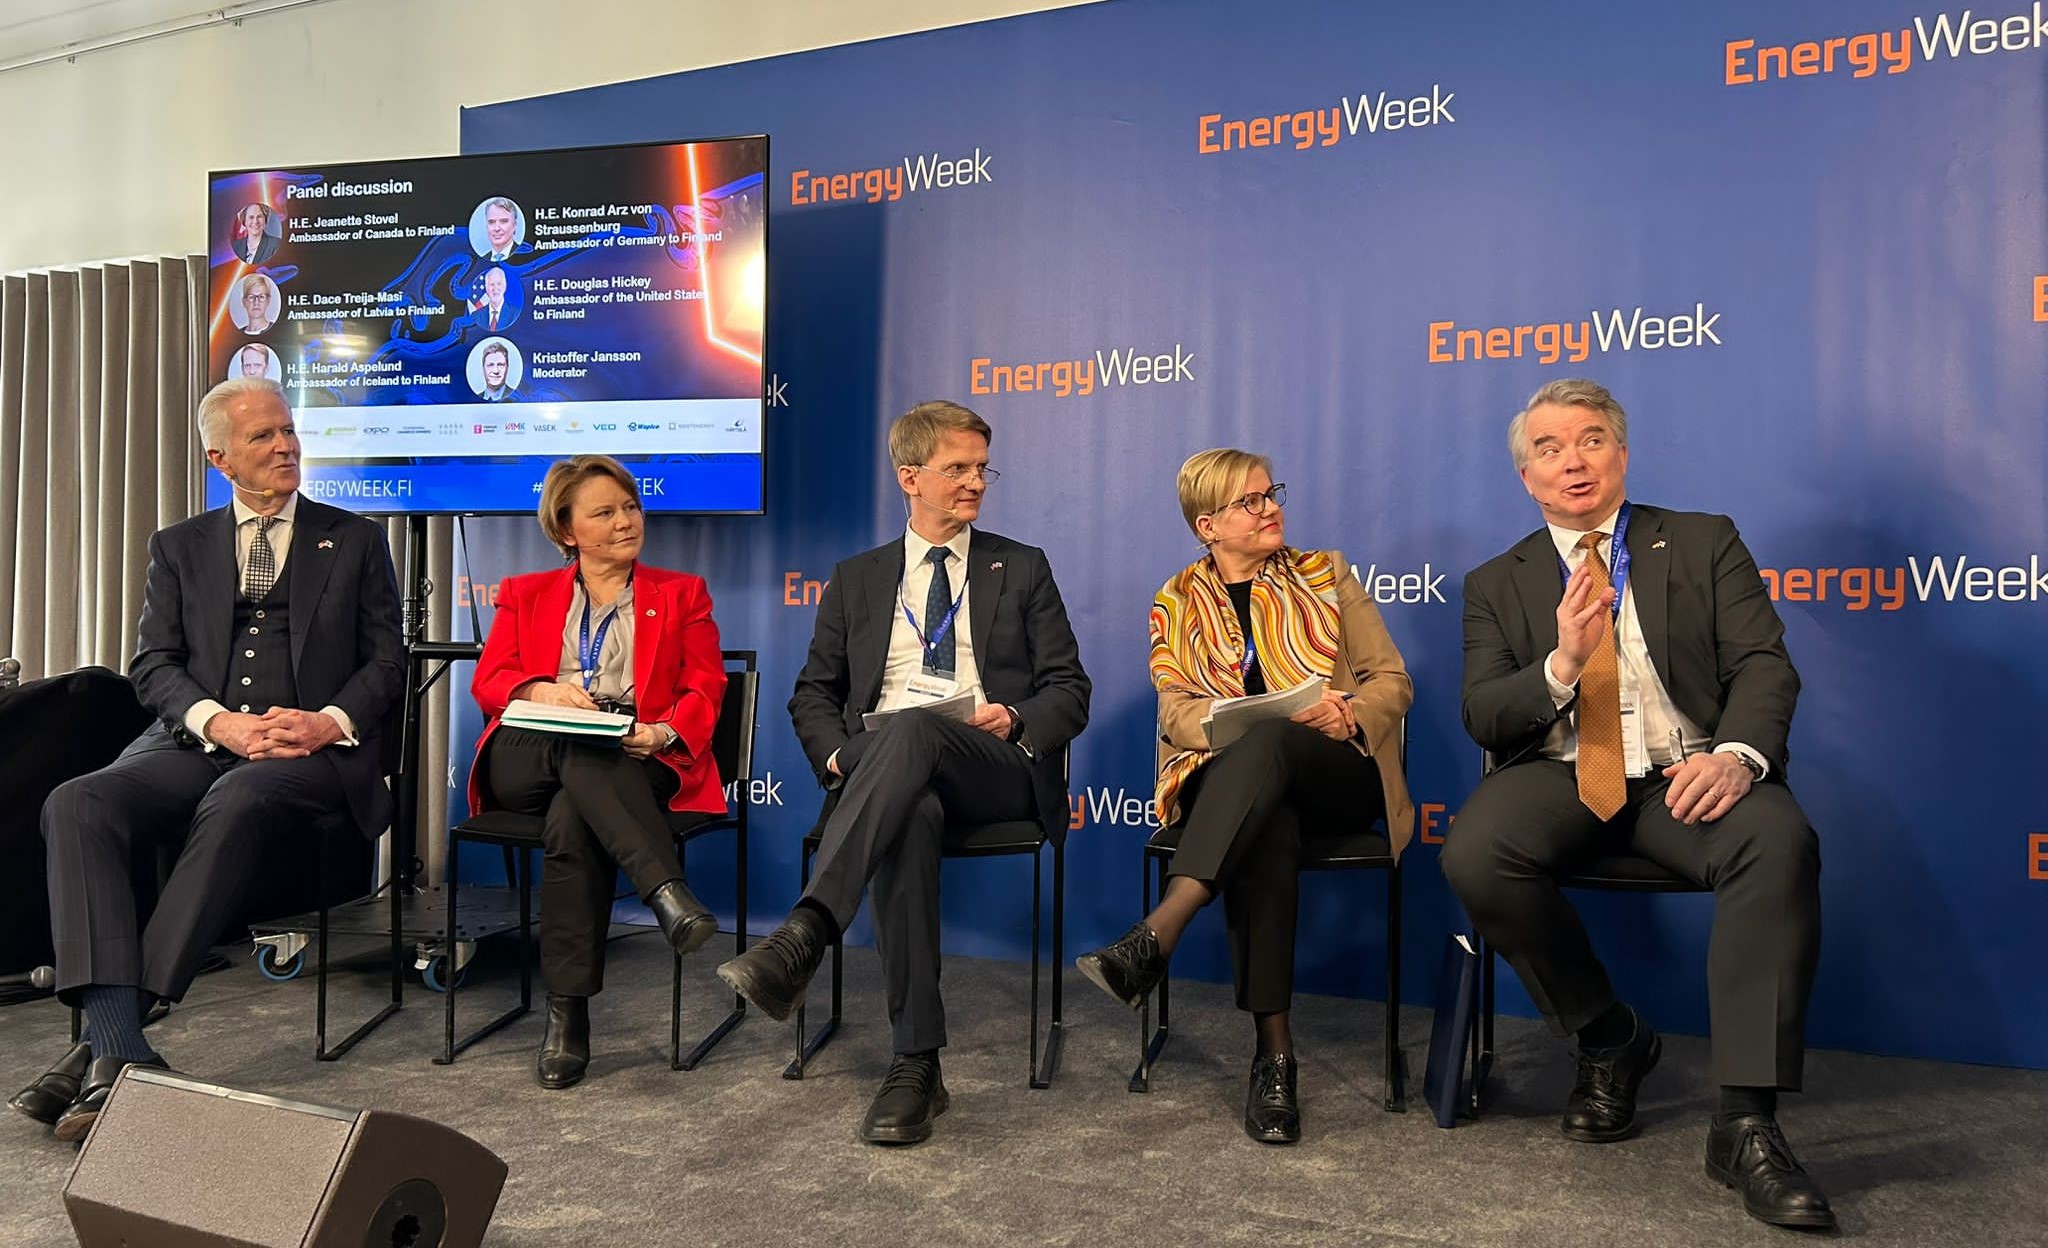 Five people sitting on chairs on a stage. In the background a wall with EnergyWeek on it.